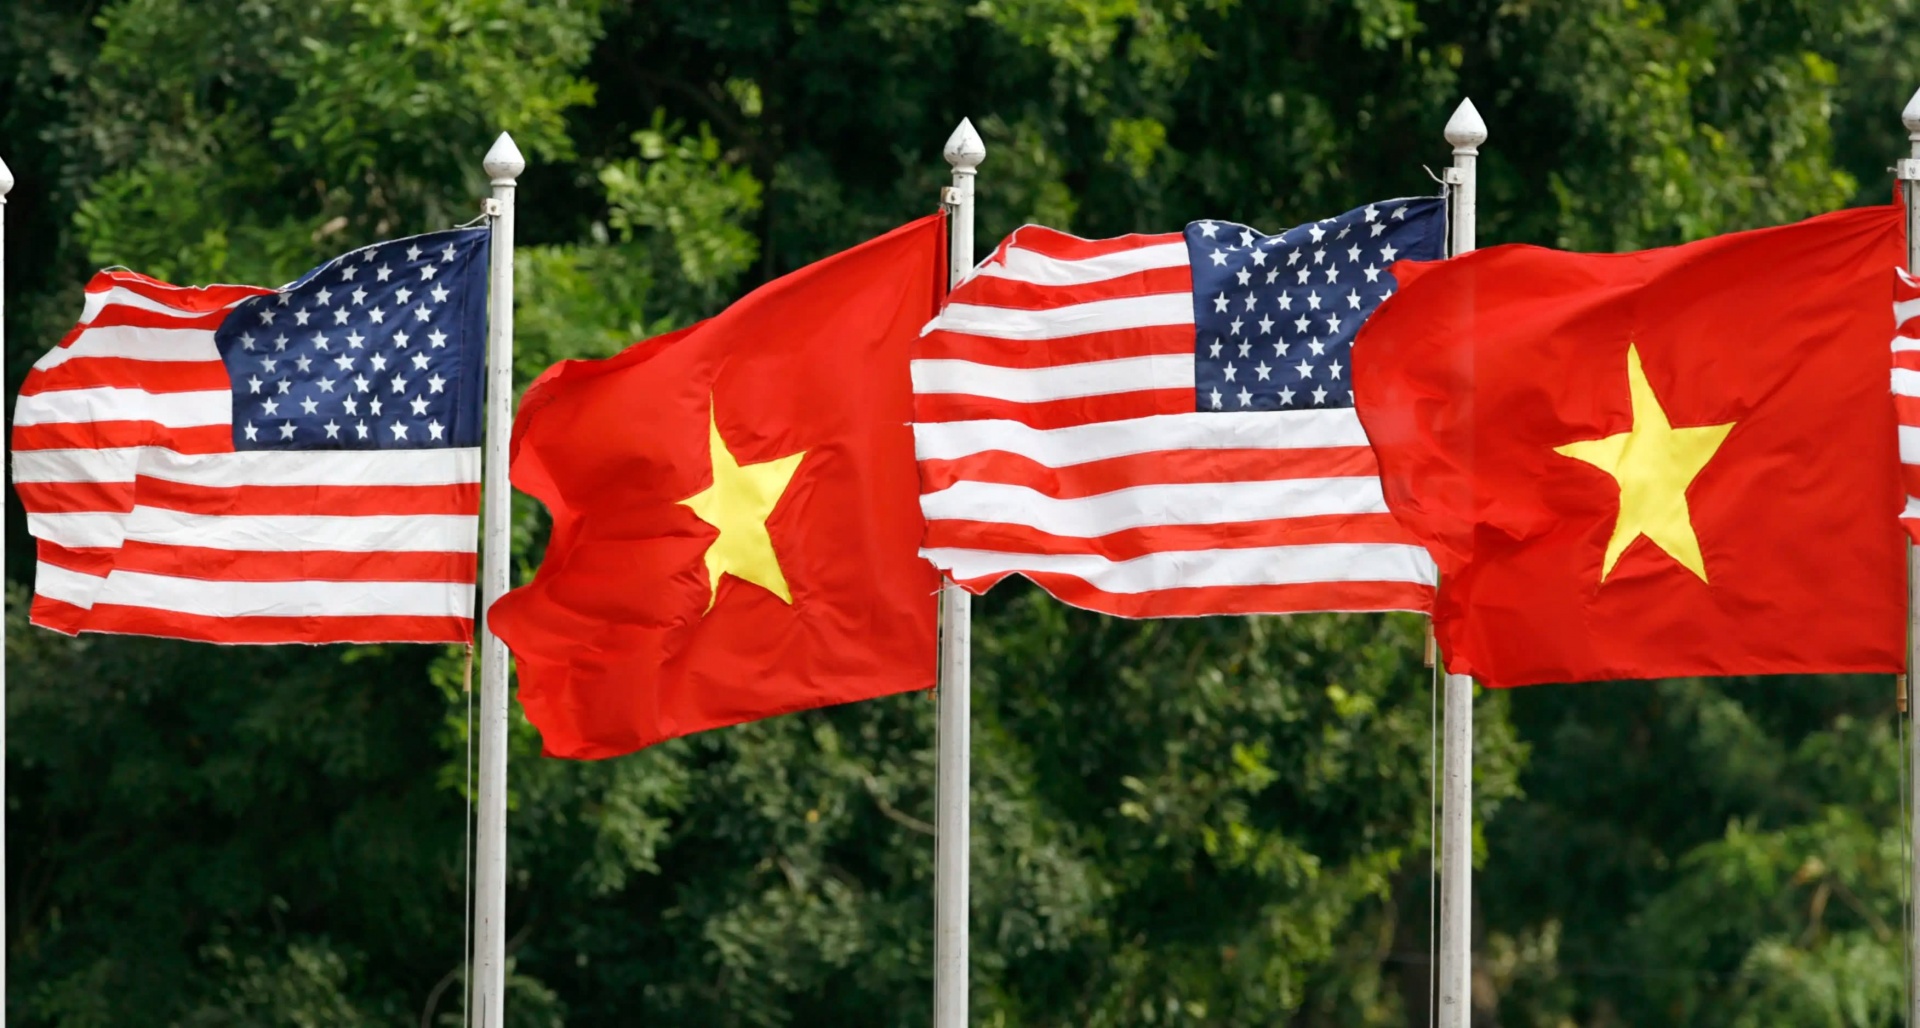 vietnam us trade relations continue developing in a harmonious and sustainable manner spokesperson